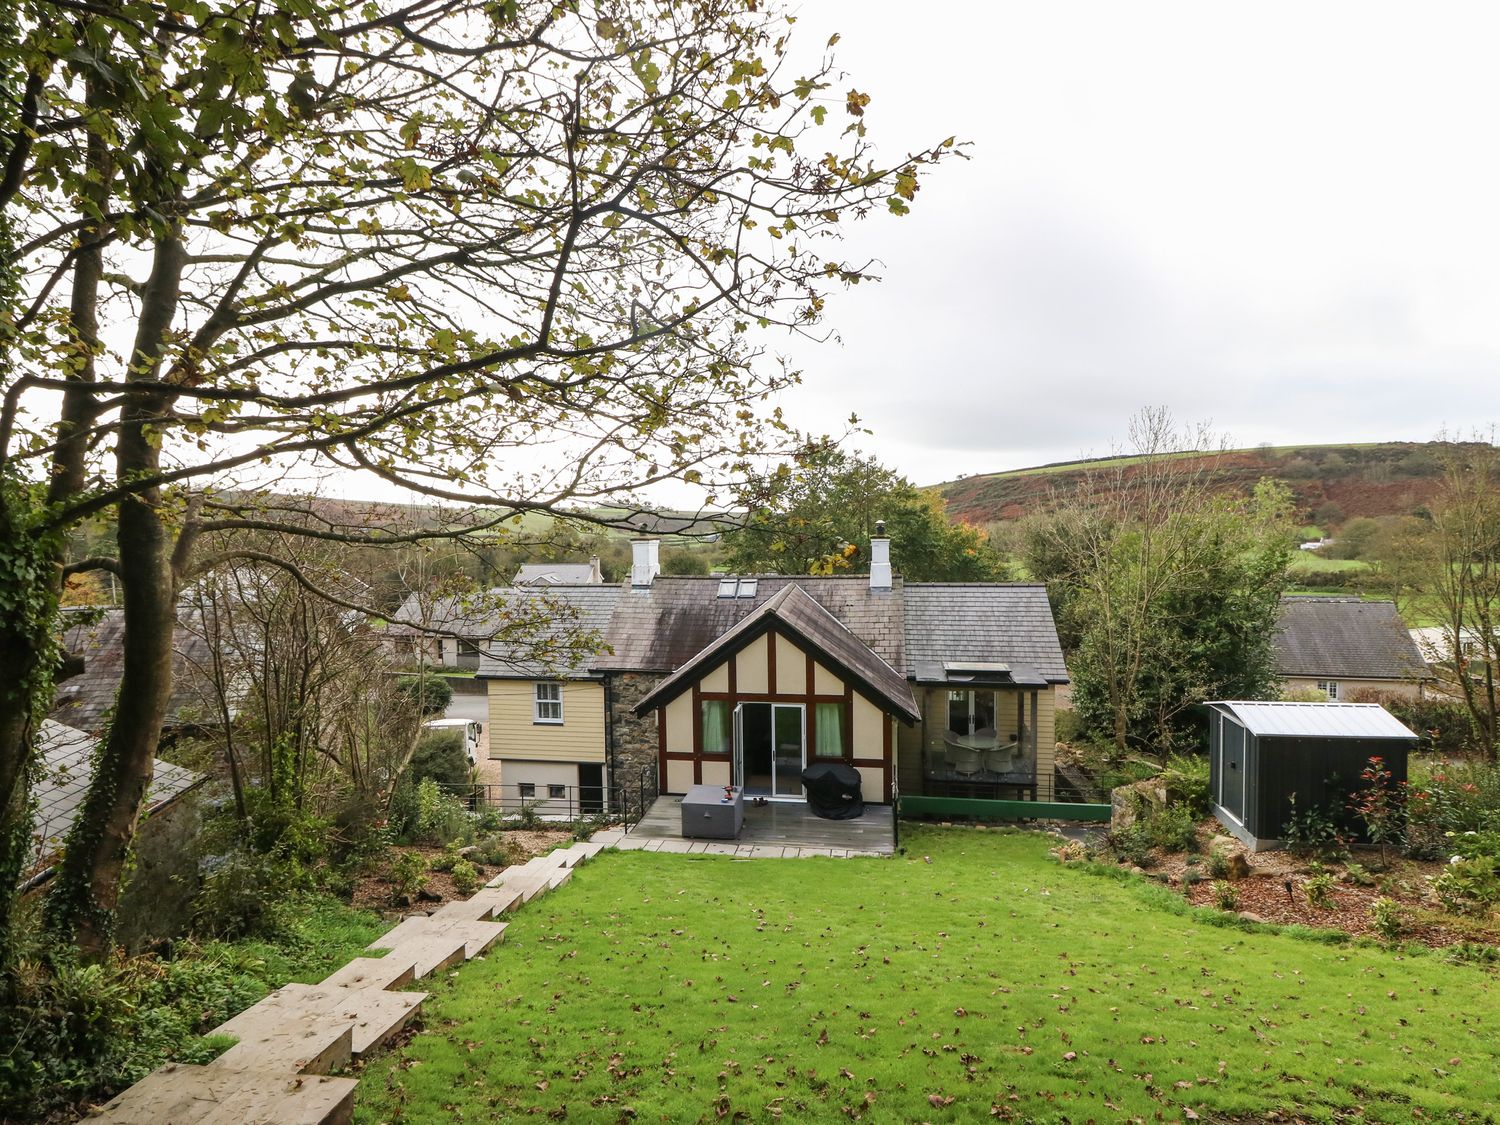 Belle View is near Abersoch in Gwynedd. Four-bedroom home with en-suite bedrooms. Hot tub. Stylish  